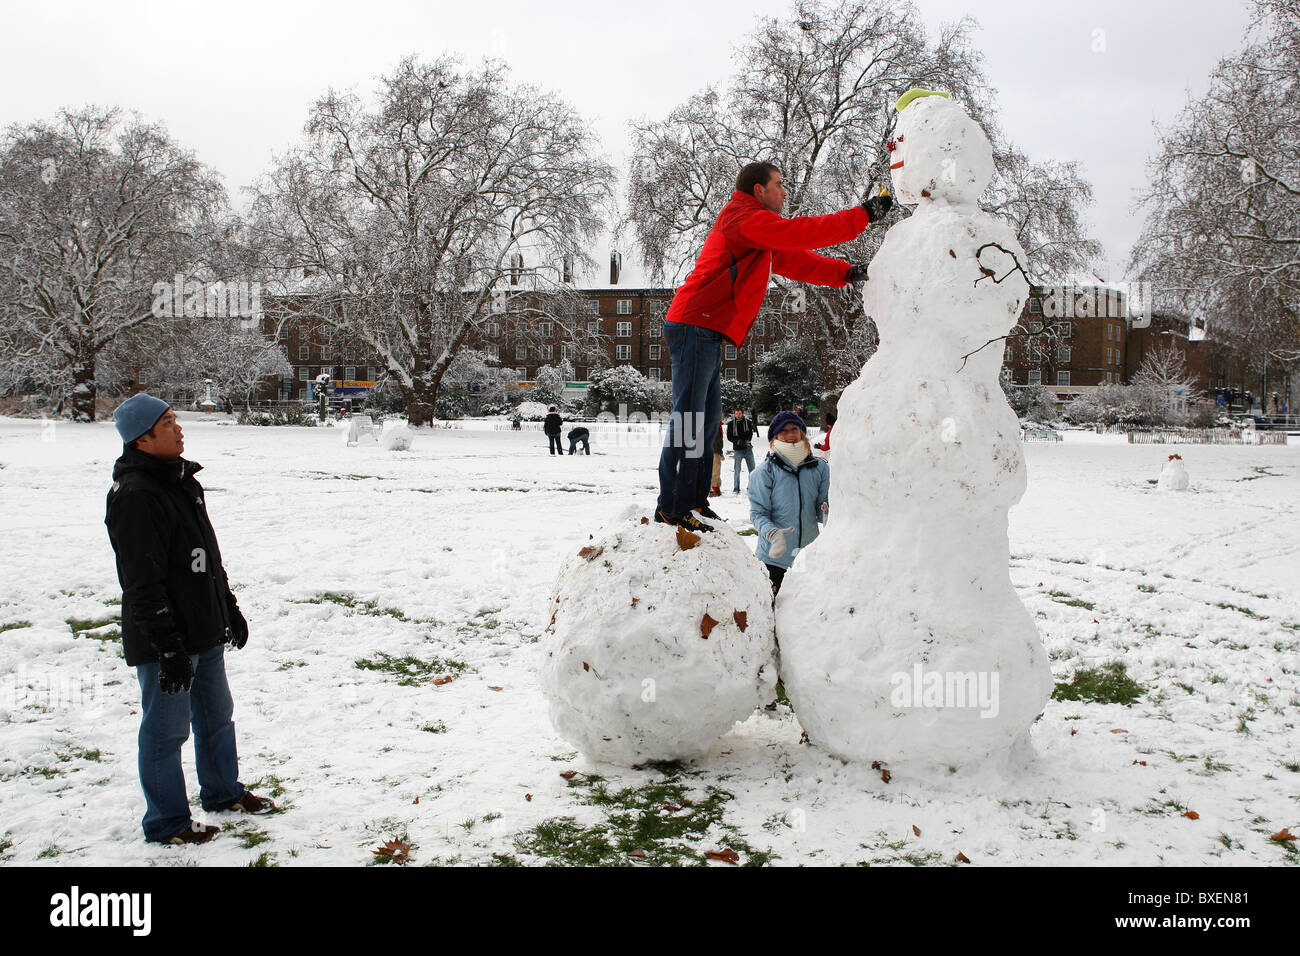 A guy is making a snowman after heavy snowfall in Kennigton Park, London, UK on December 18th, 2010. Stock Photo